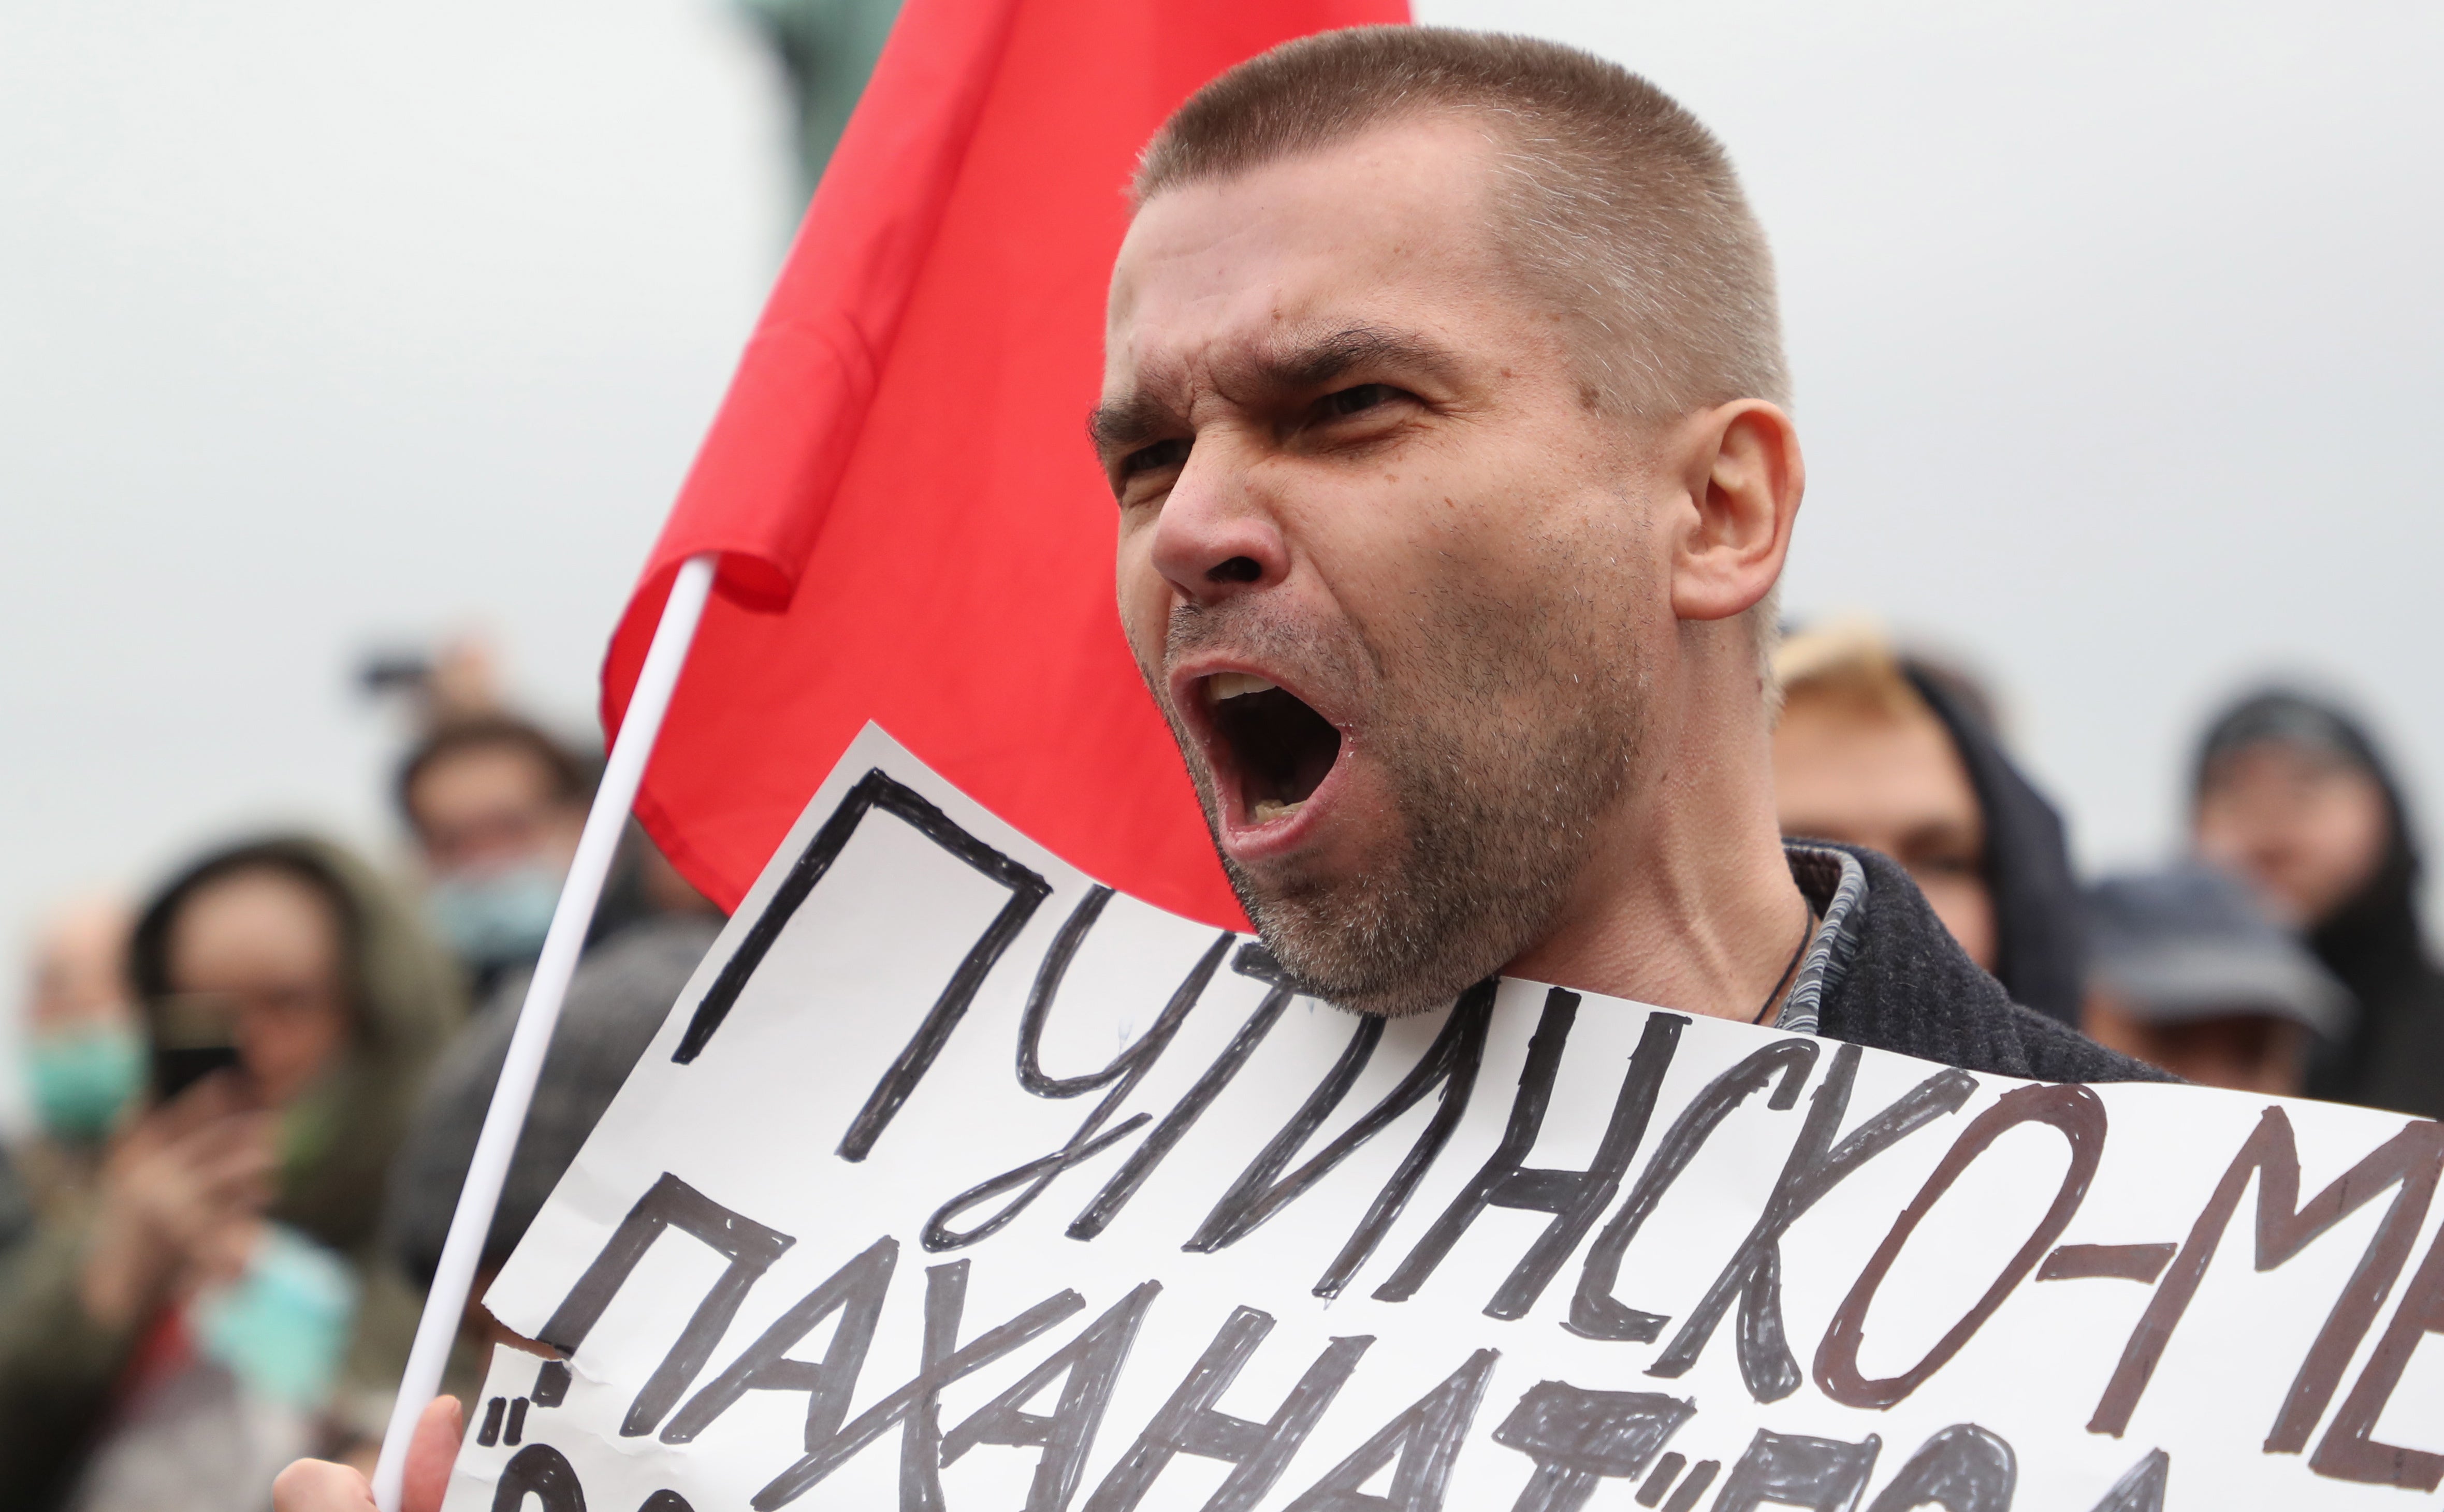 A Russian Communist party supporter at the protest against election fraud in Moscow on Saturday